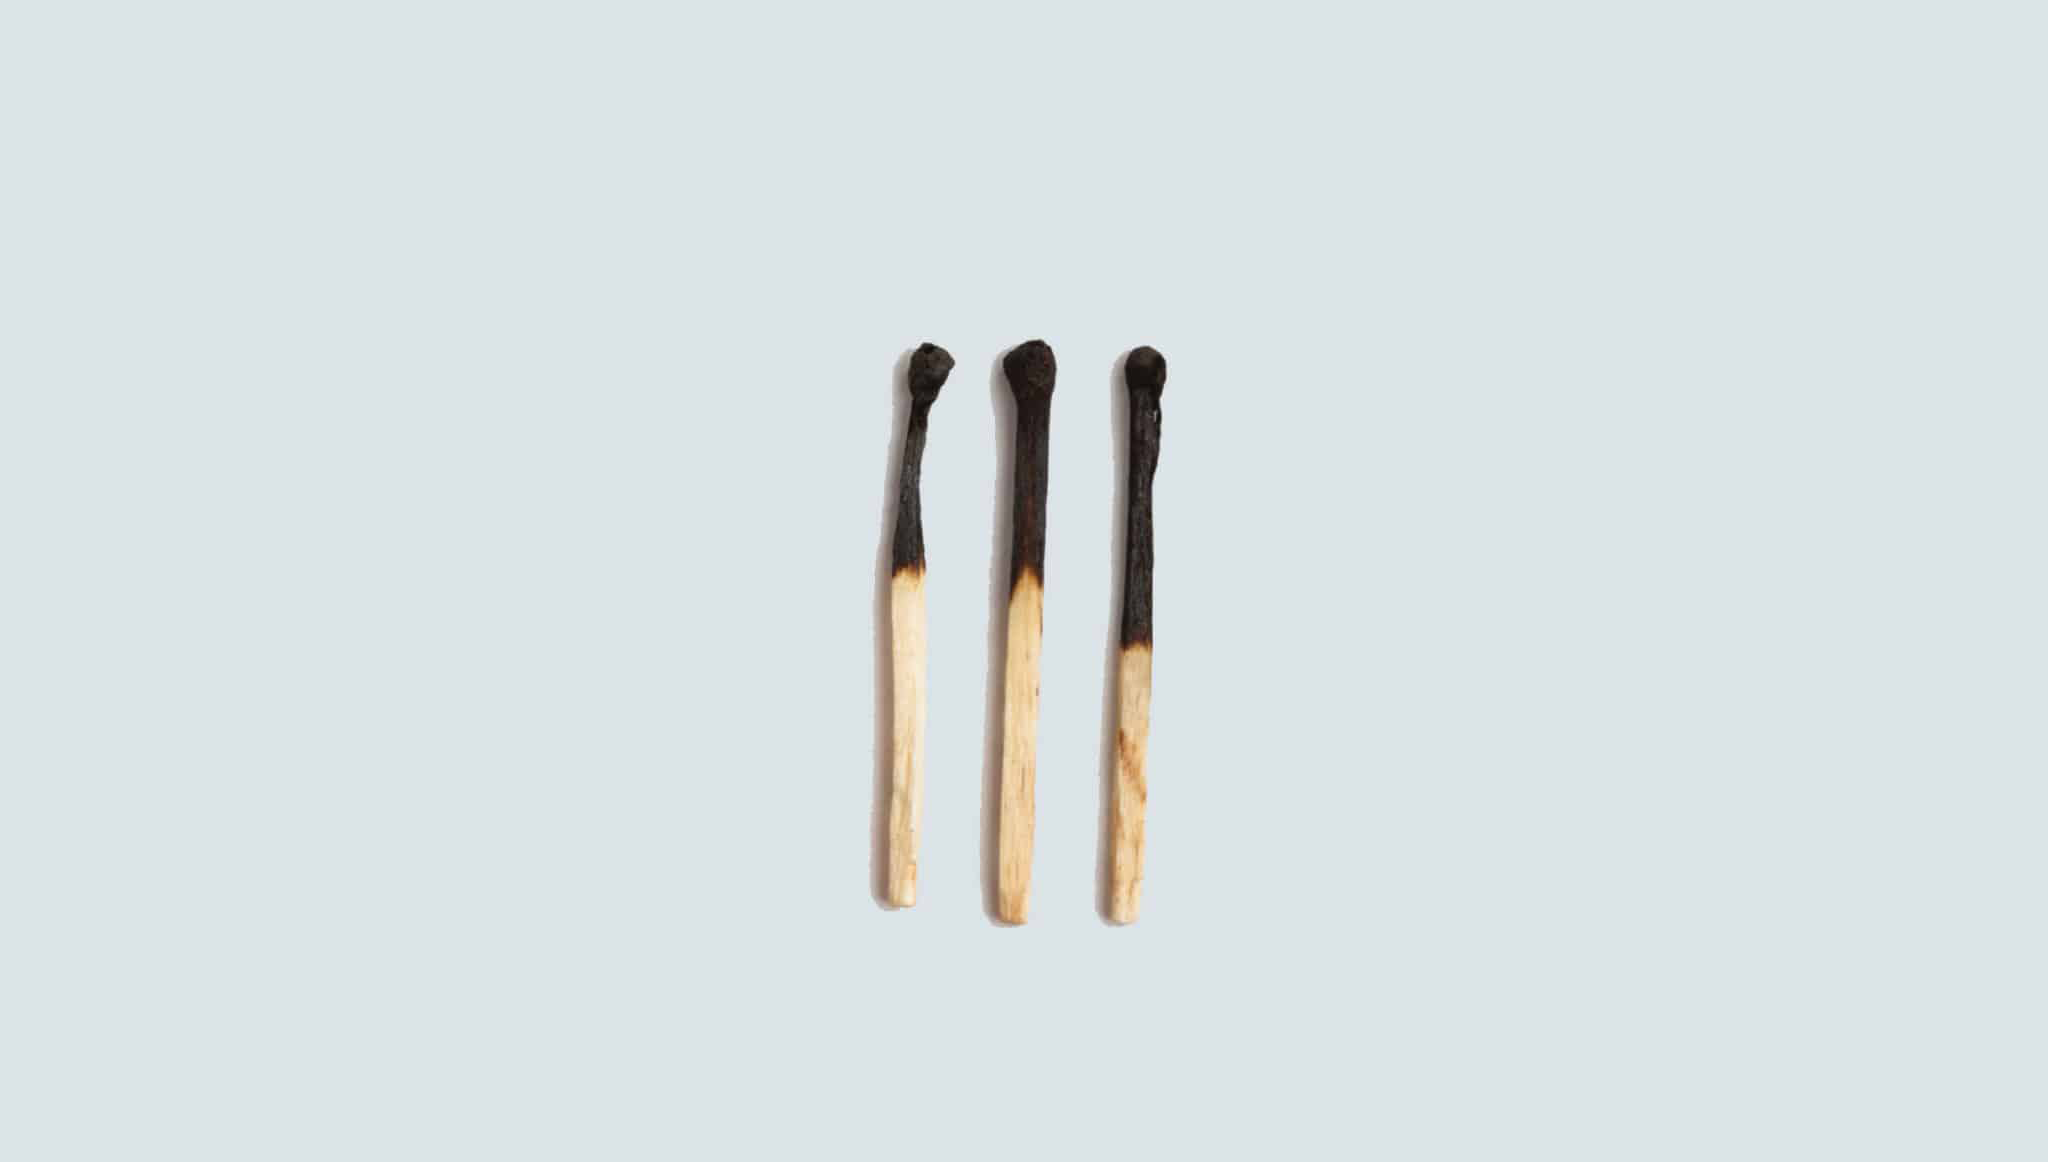 Photo of three matchsticks next to each other